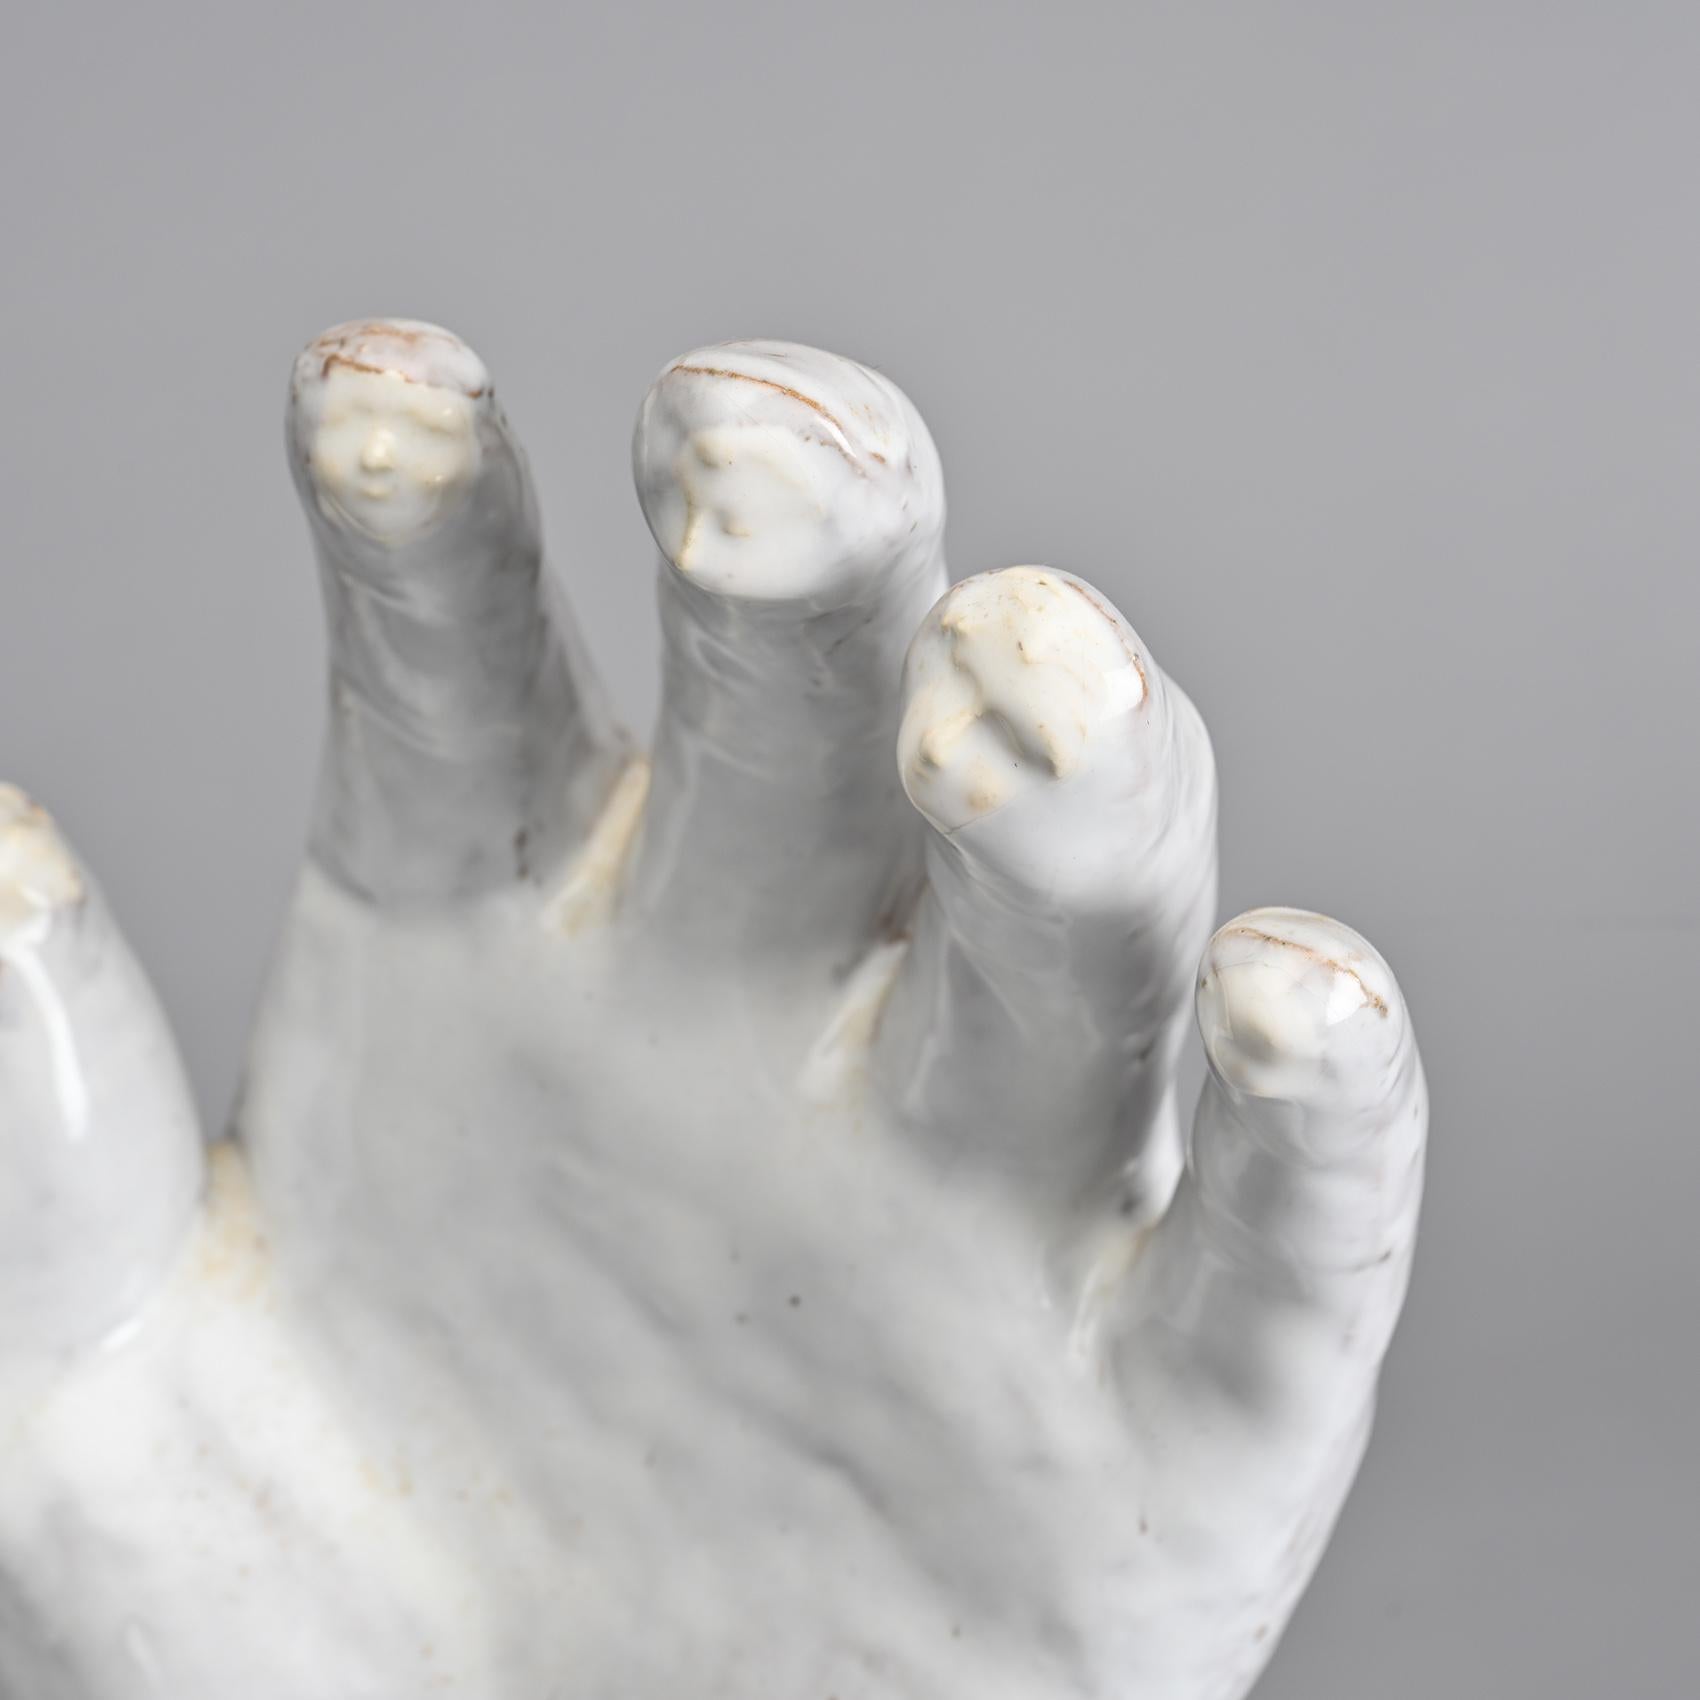 Ceramic Sculpture of a Hand by the Cloutier Brothers, Unique Piece